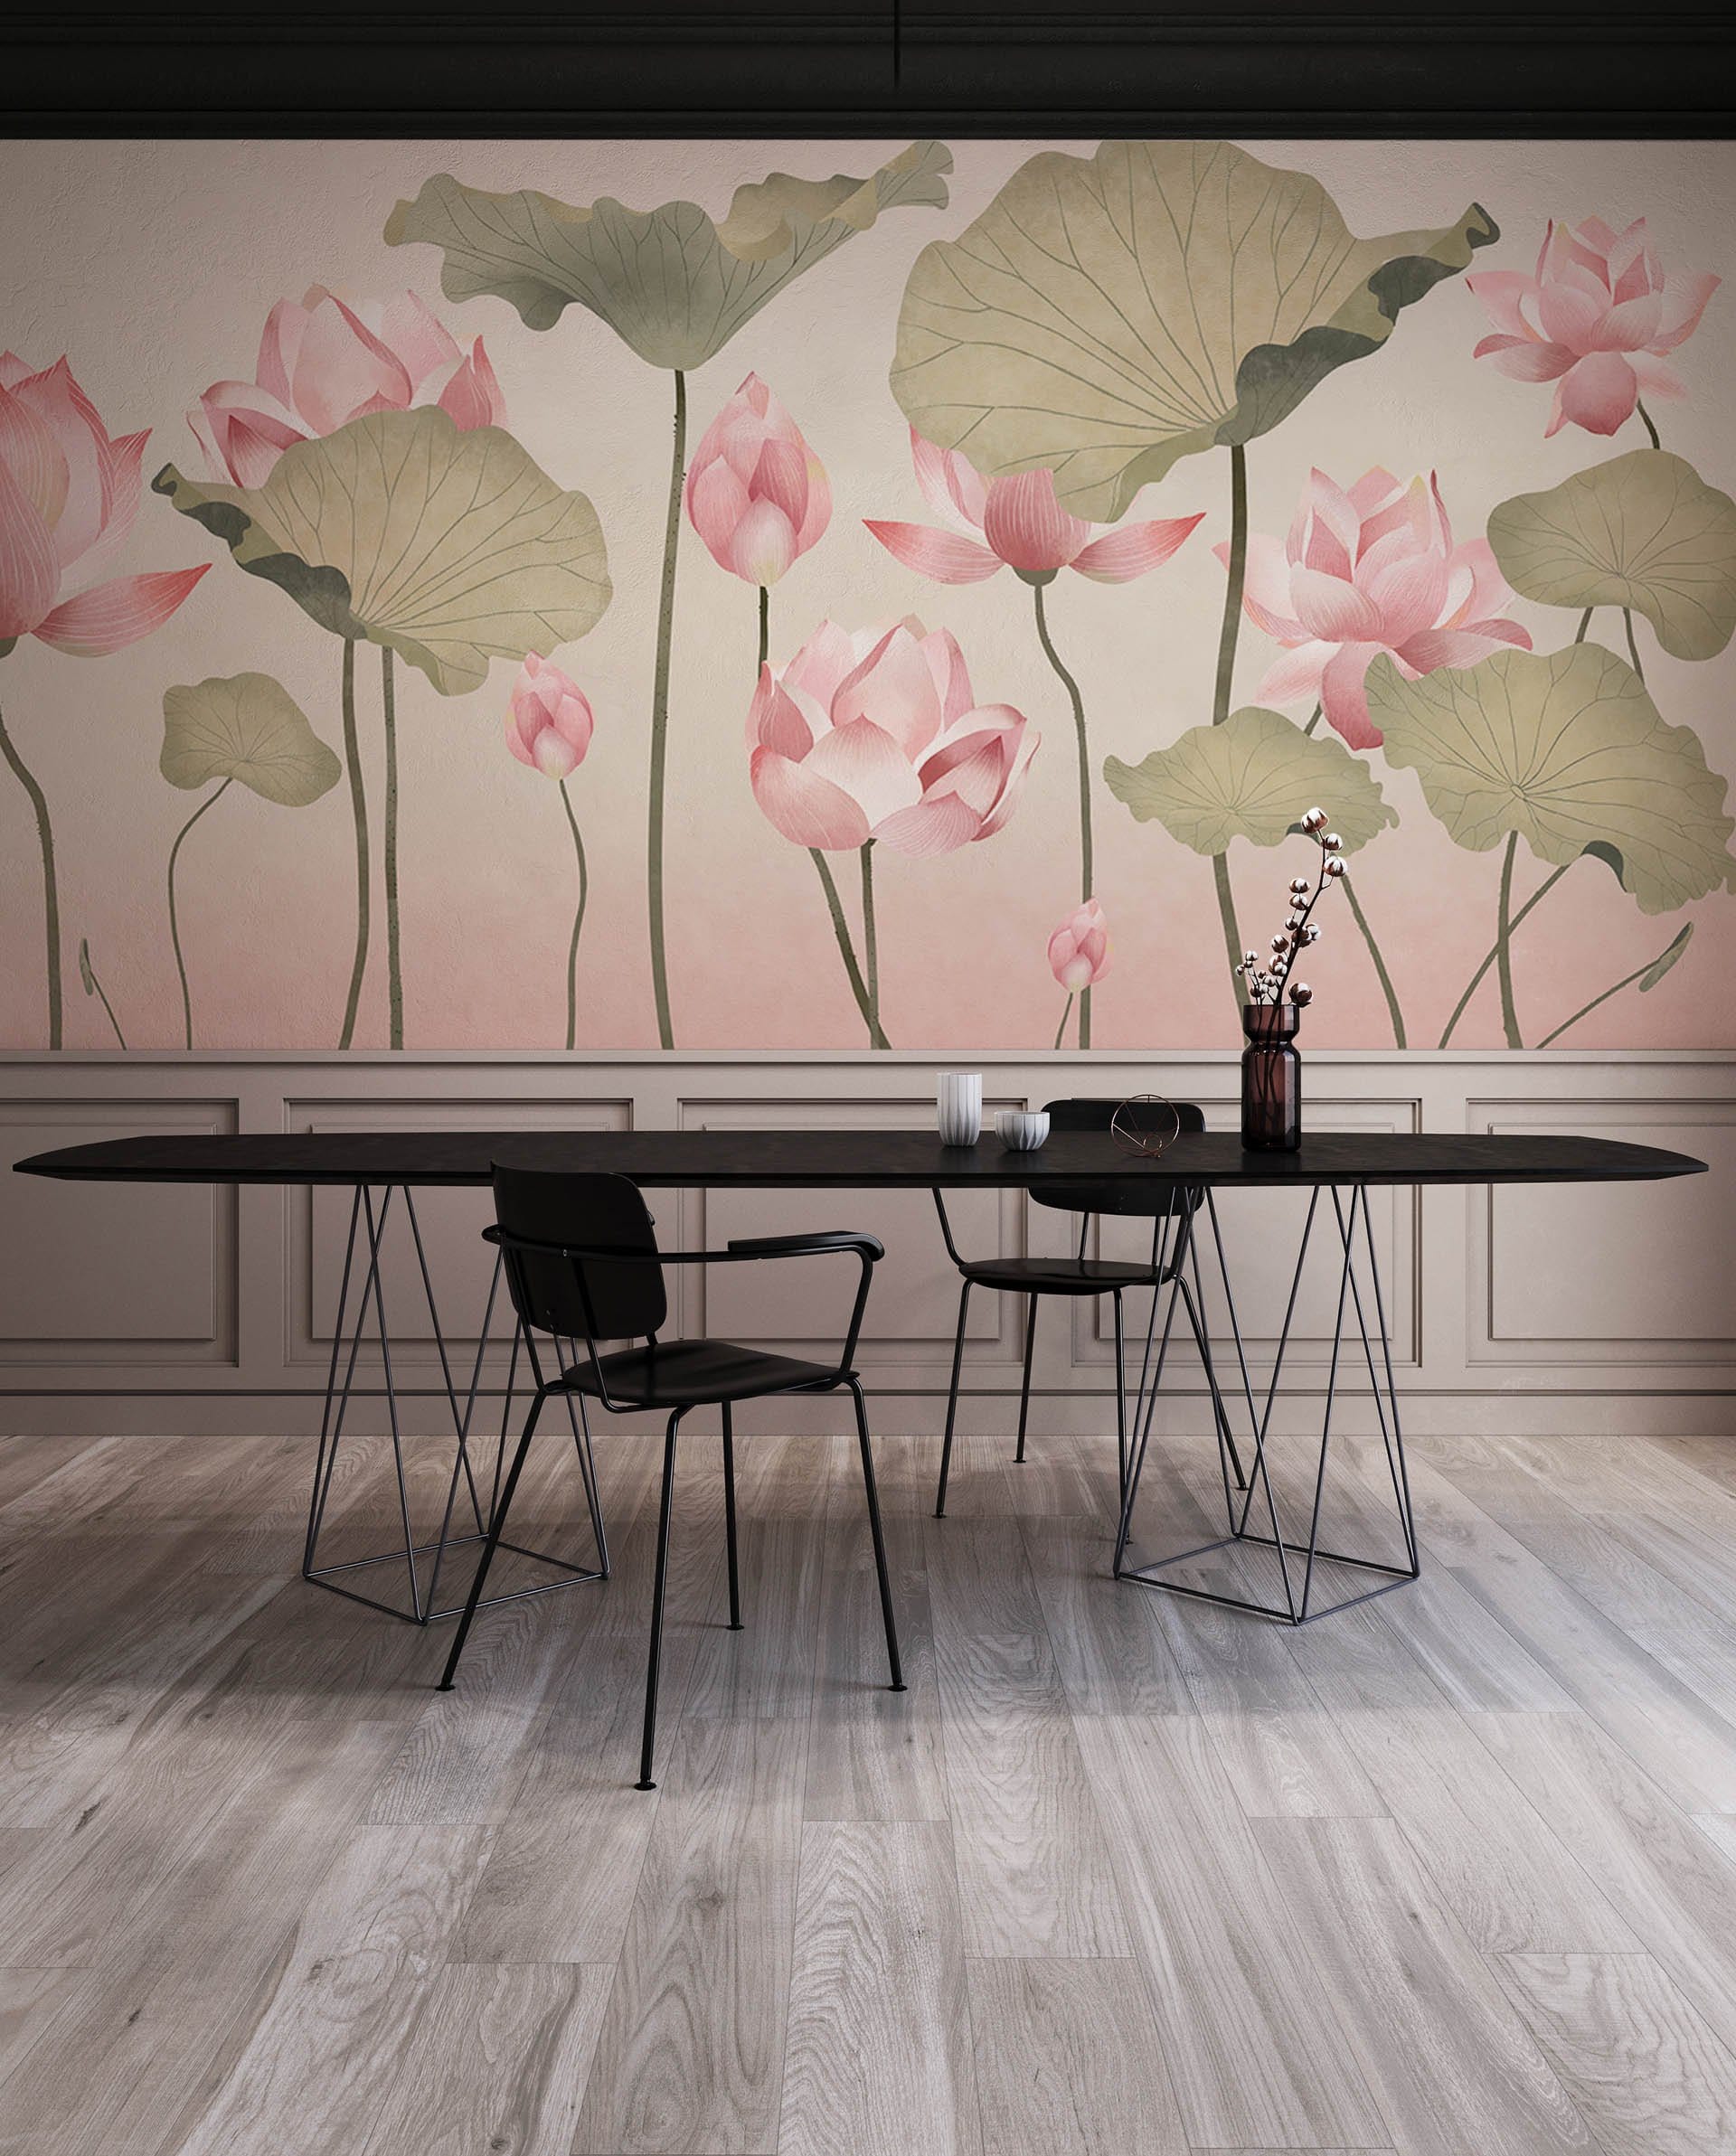 Wallpaper mural with lotus flowers for use in decorating the dining room